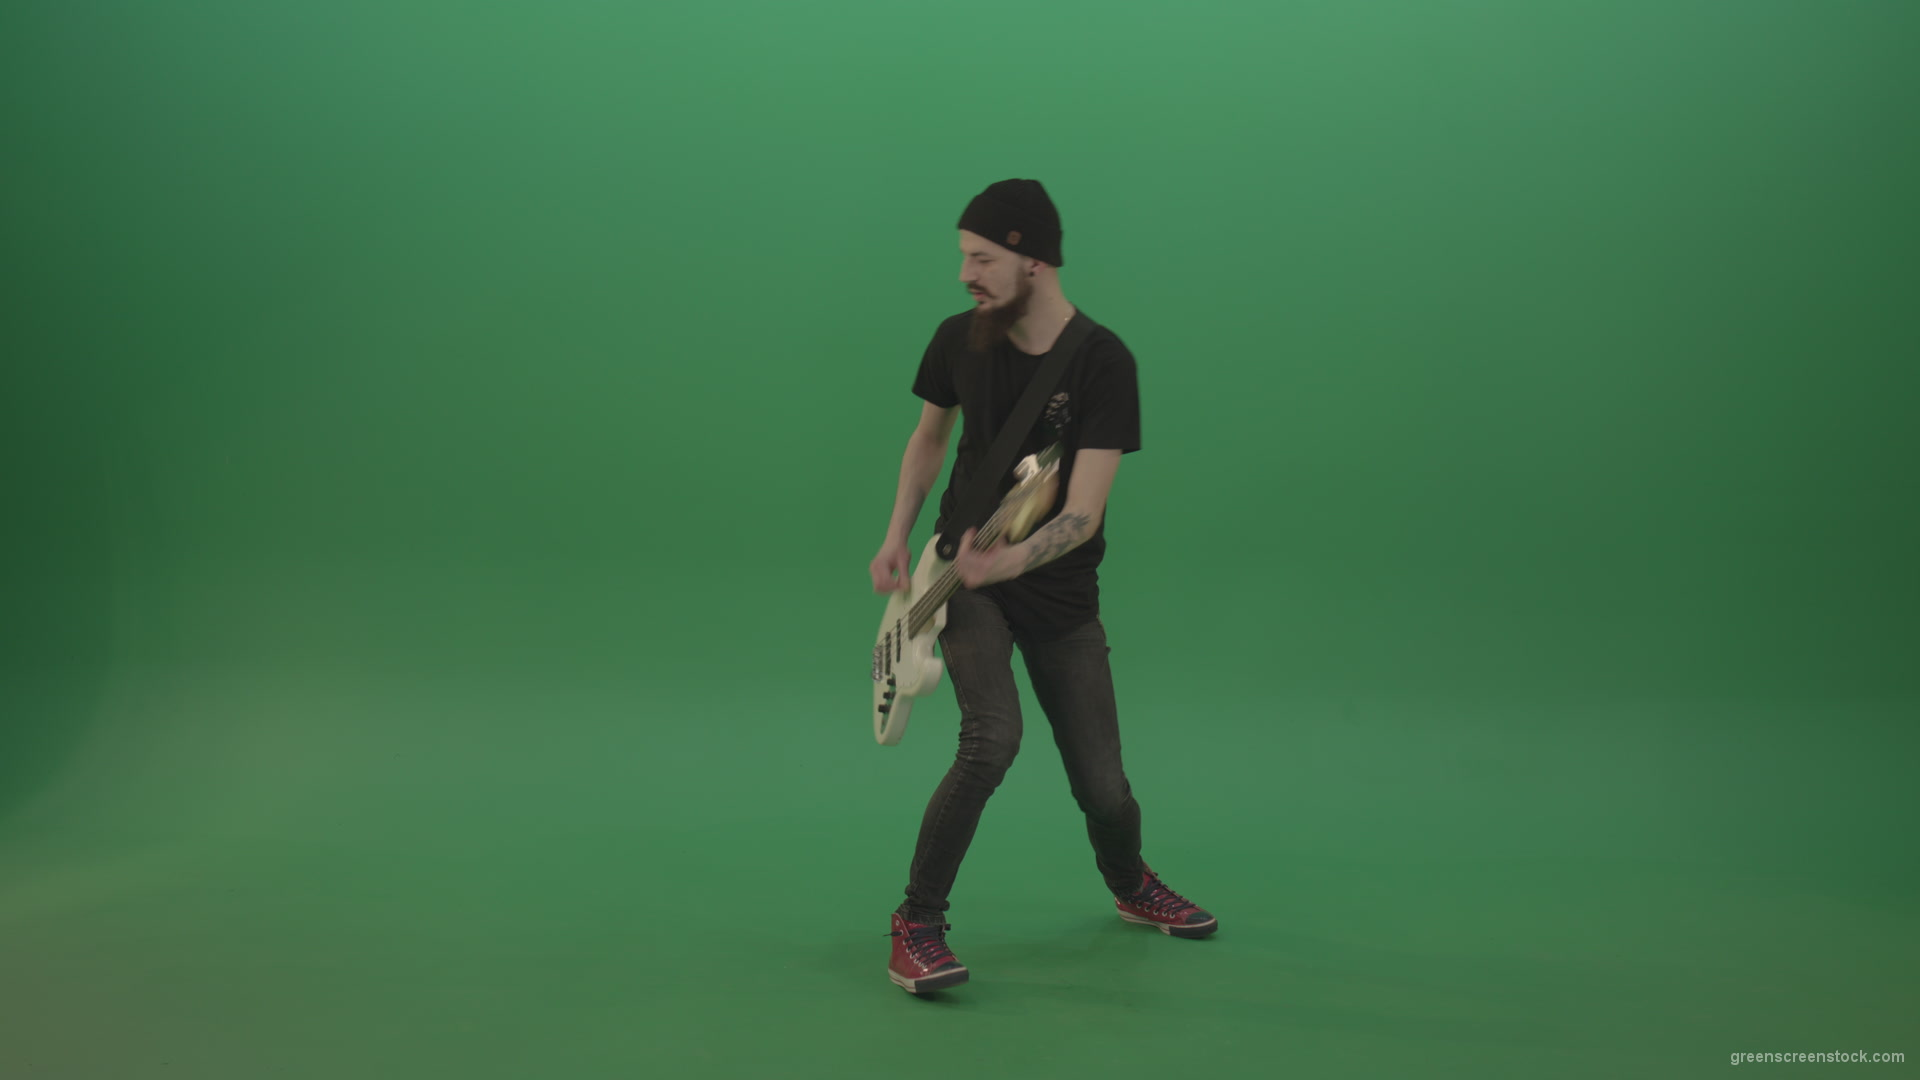 Man-play-music-instrument-bass-guitar-isolated-on-green-screen_009 Green Screen Stock